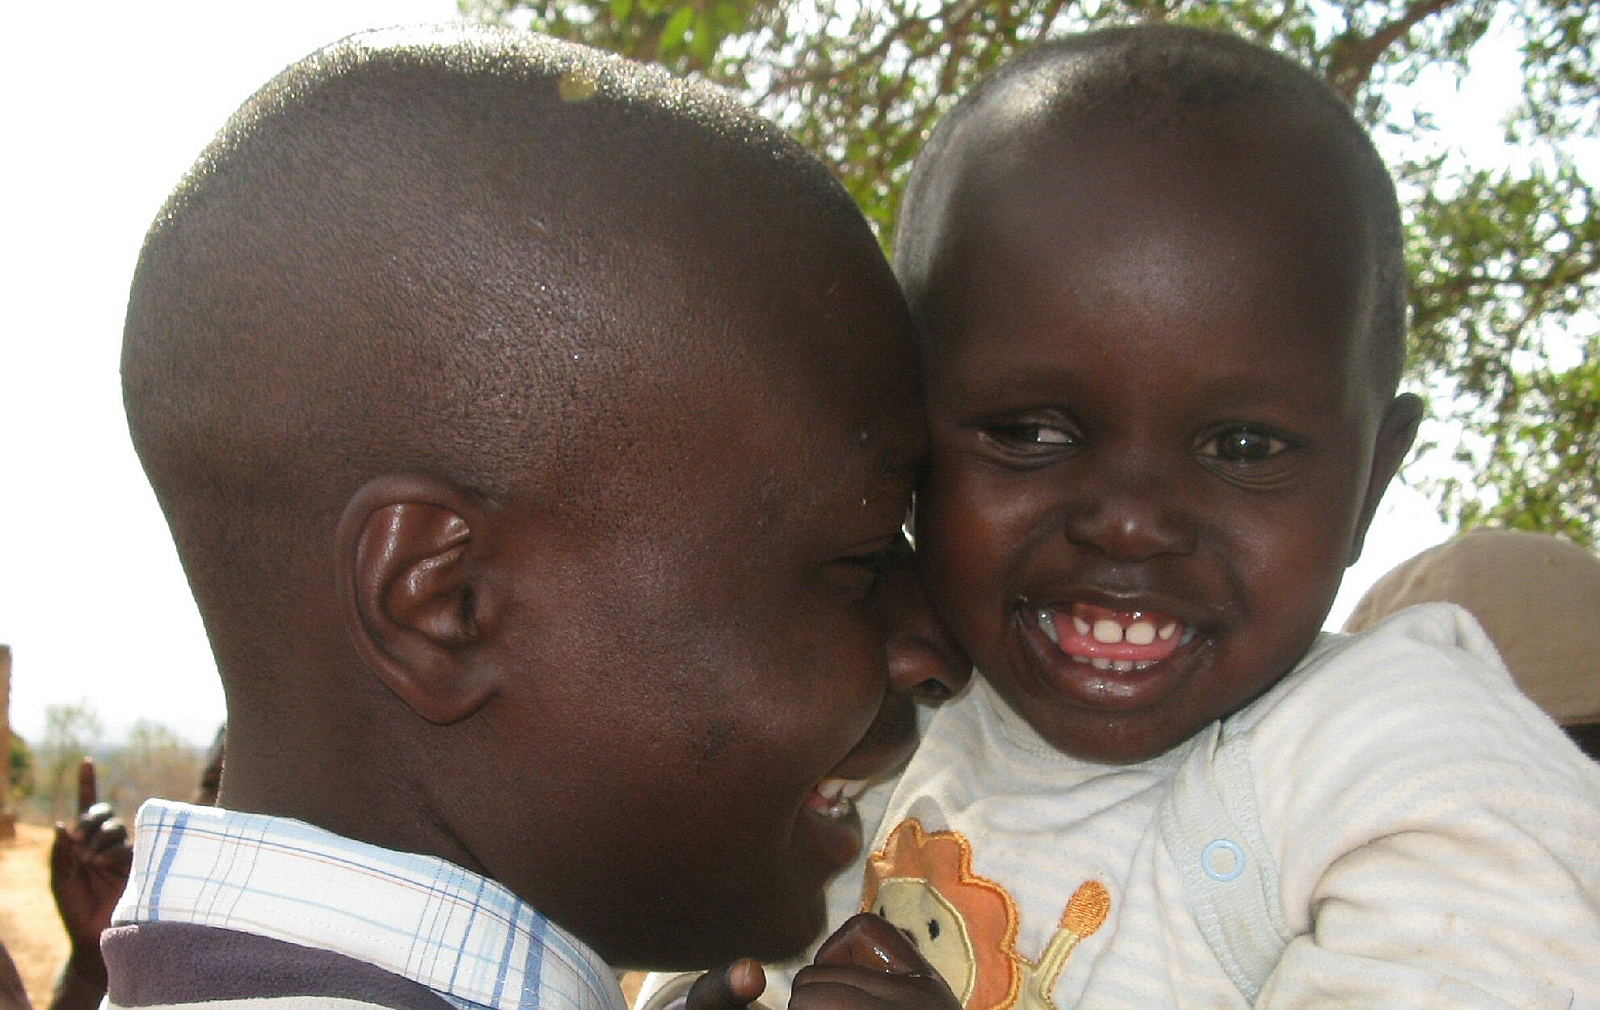 A young girl rests in her father's arms as they smile at one another. One of her eyes has a white pupil glow, and the other has an outward turned squint. The background is a rural African village.